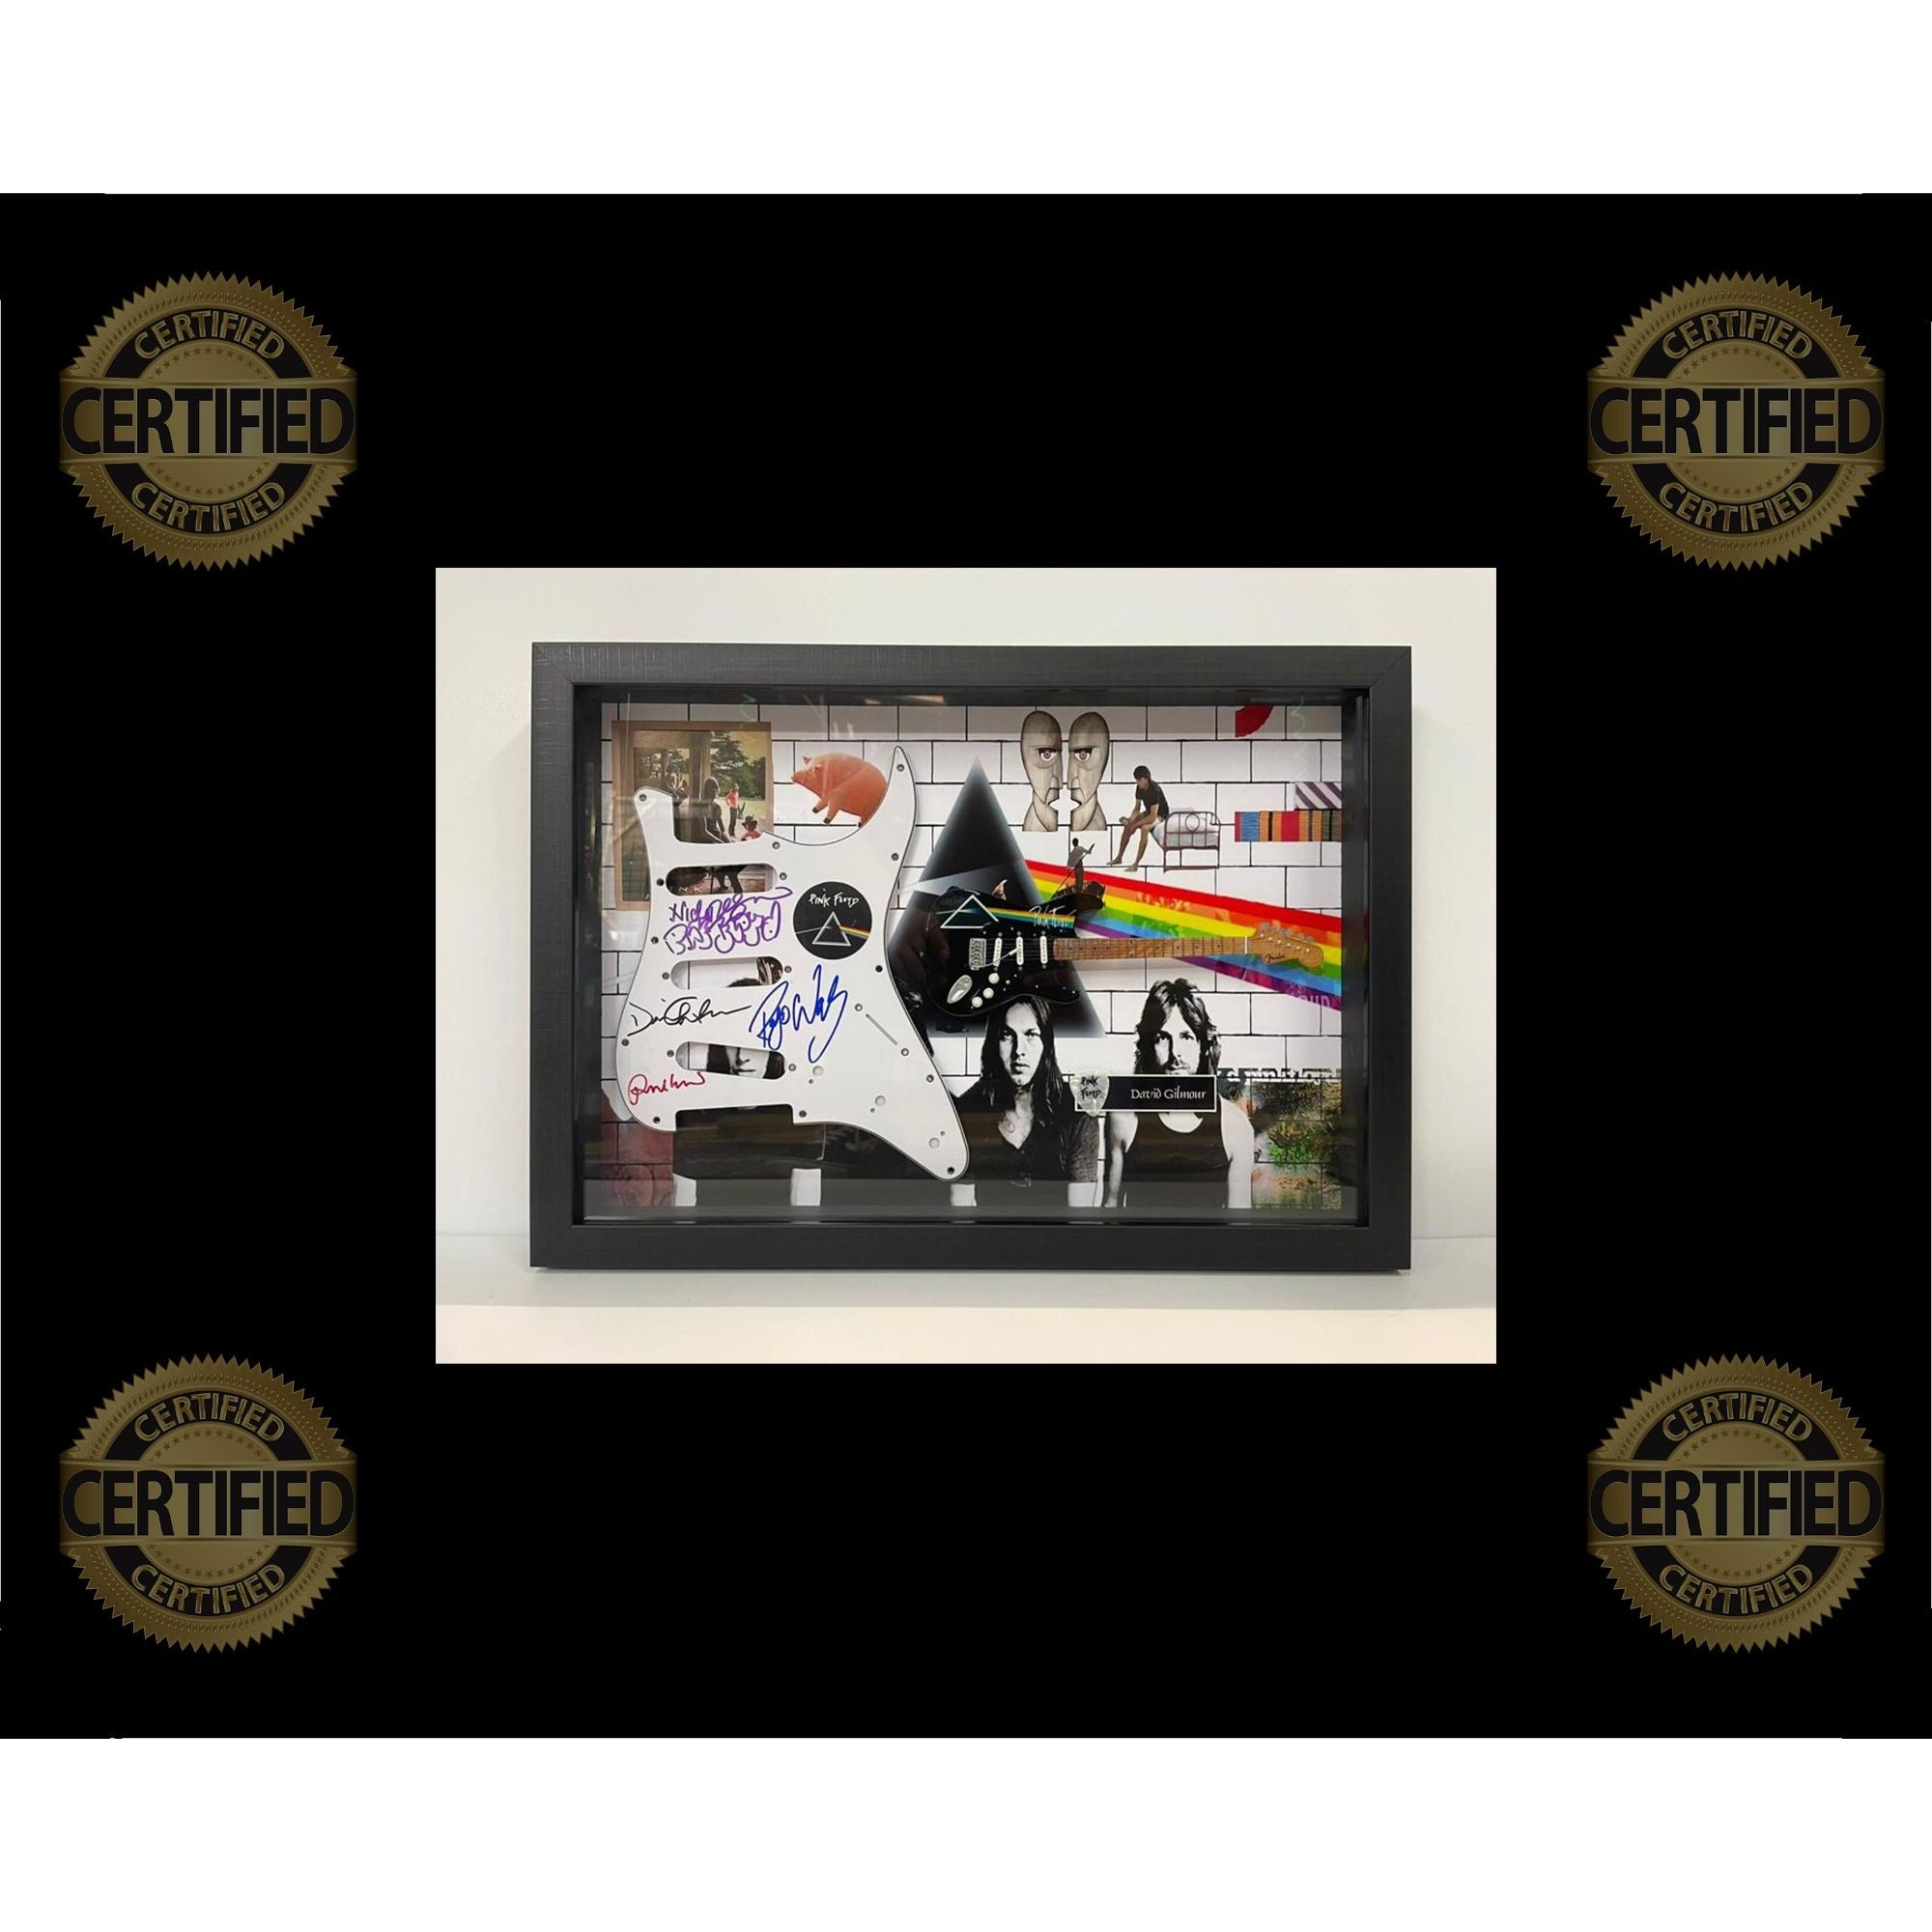 Pink Floyd David Gilmour Roger Waters Richard Wright Nick Mason framed electric guitar pickguard signed with proof